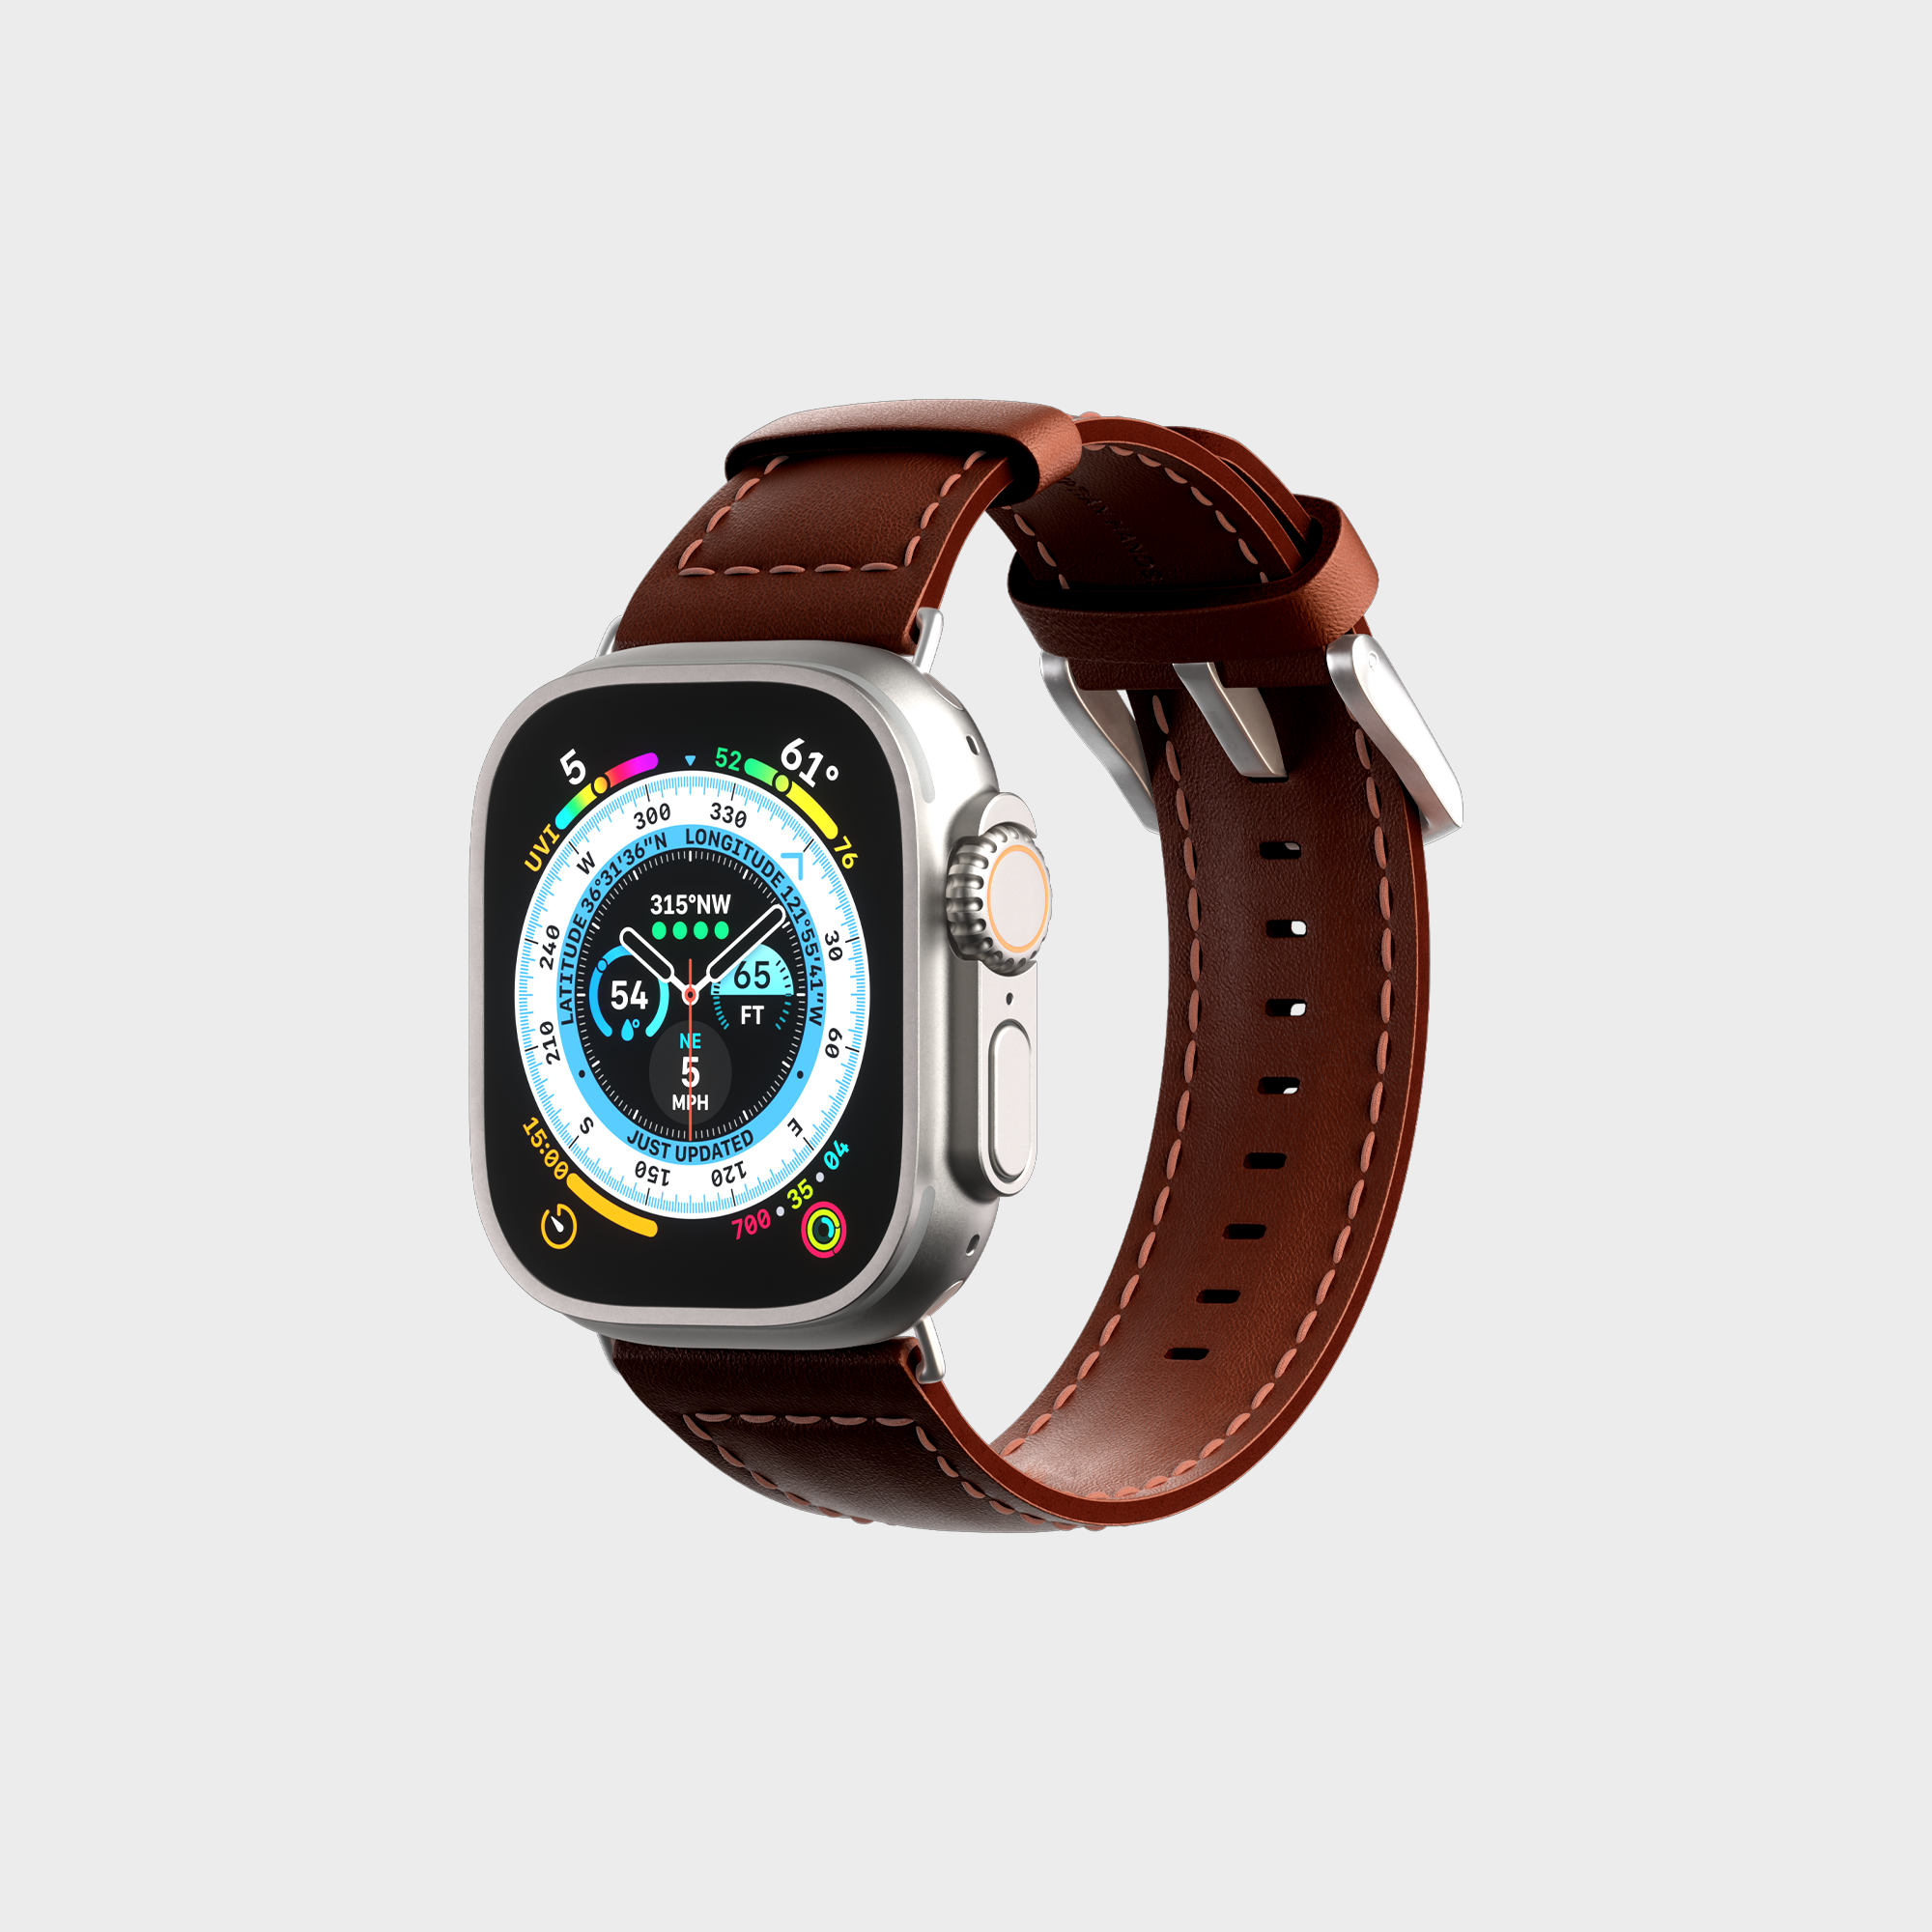 Smartwatch with health tracking features and brown leather strap on a white background.